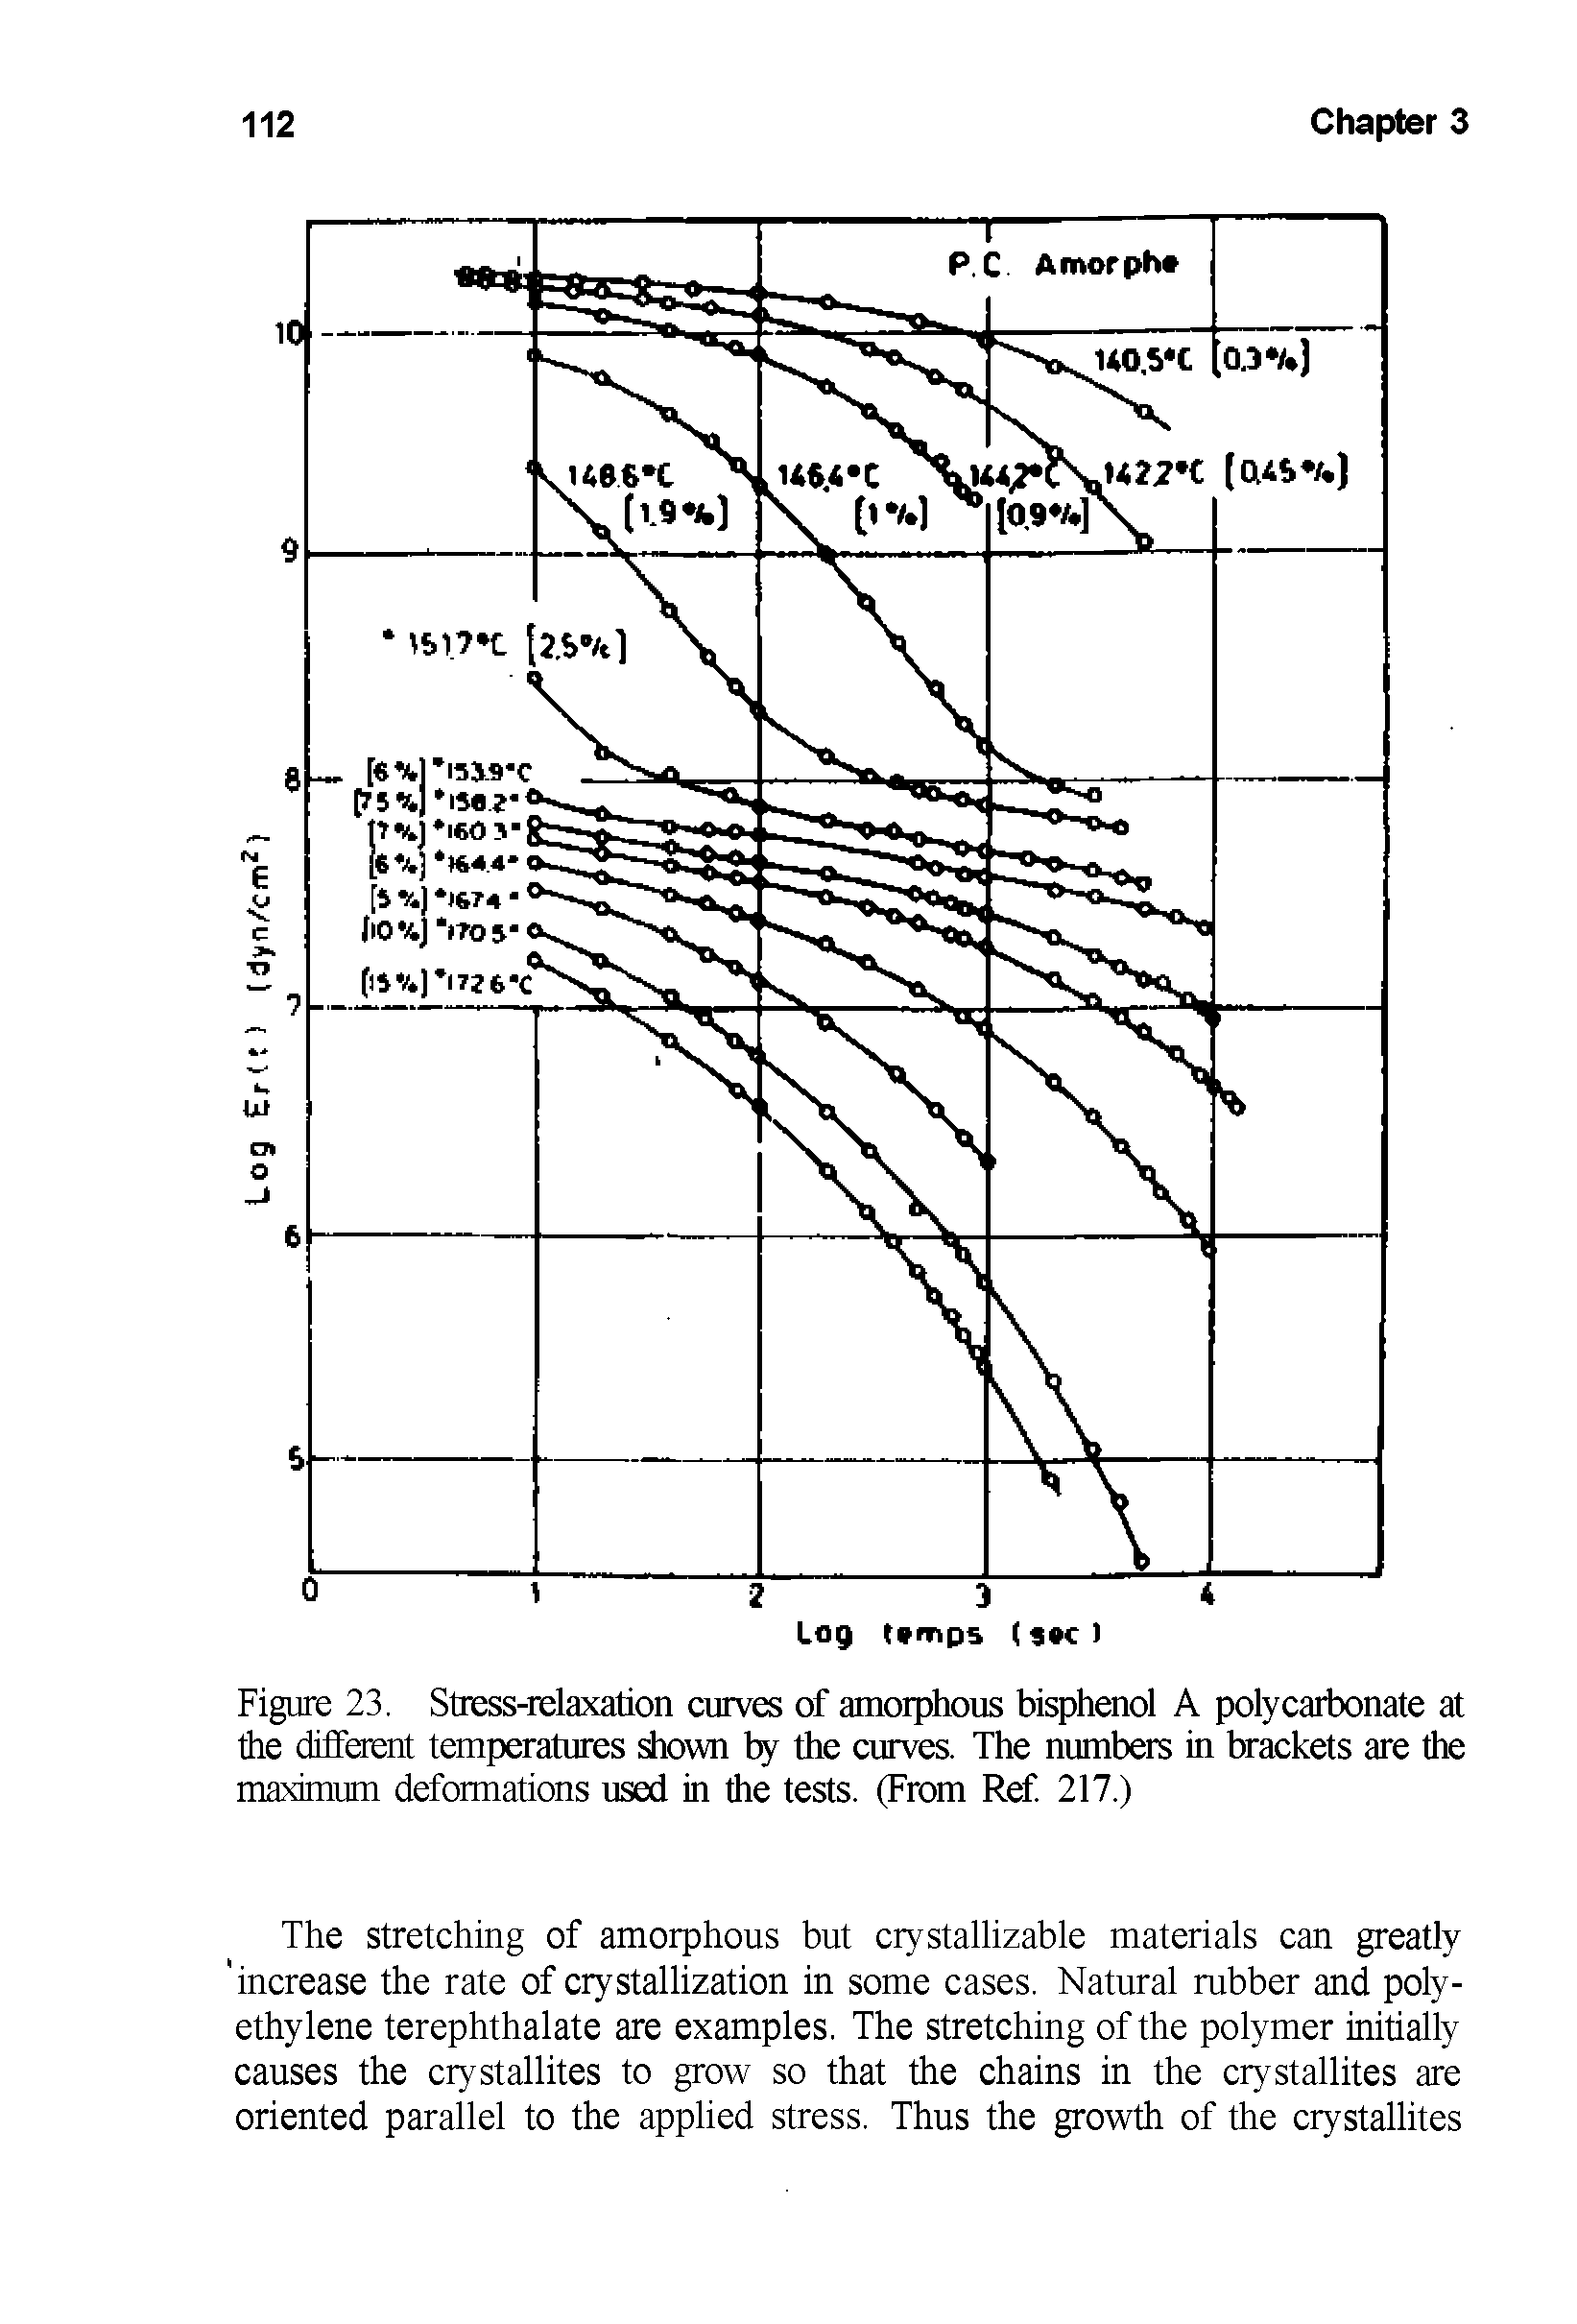 Figure 23. Stress-relaxation curves of amorphous bisphenol A polycarbonate at the different temperatures shown by the curves. The numbers in brackets are the maximum deformations used in the tests. (From Ref. 217.)...